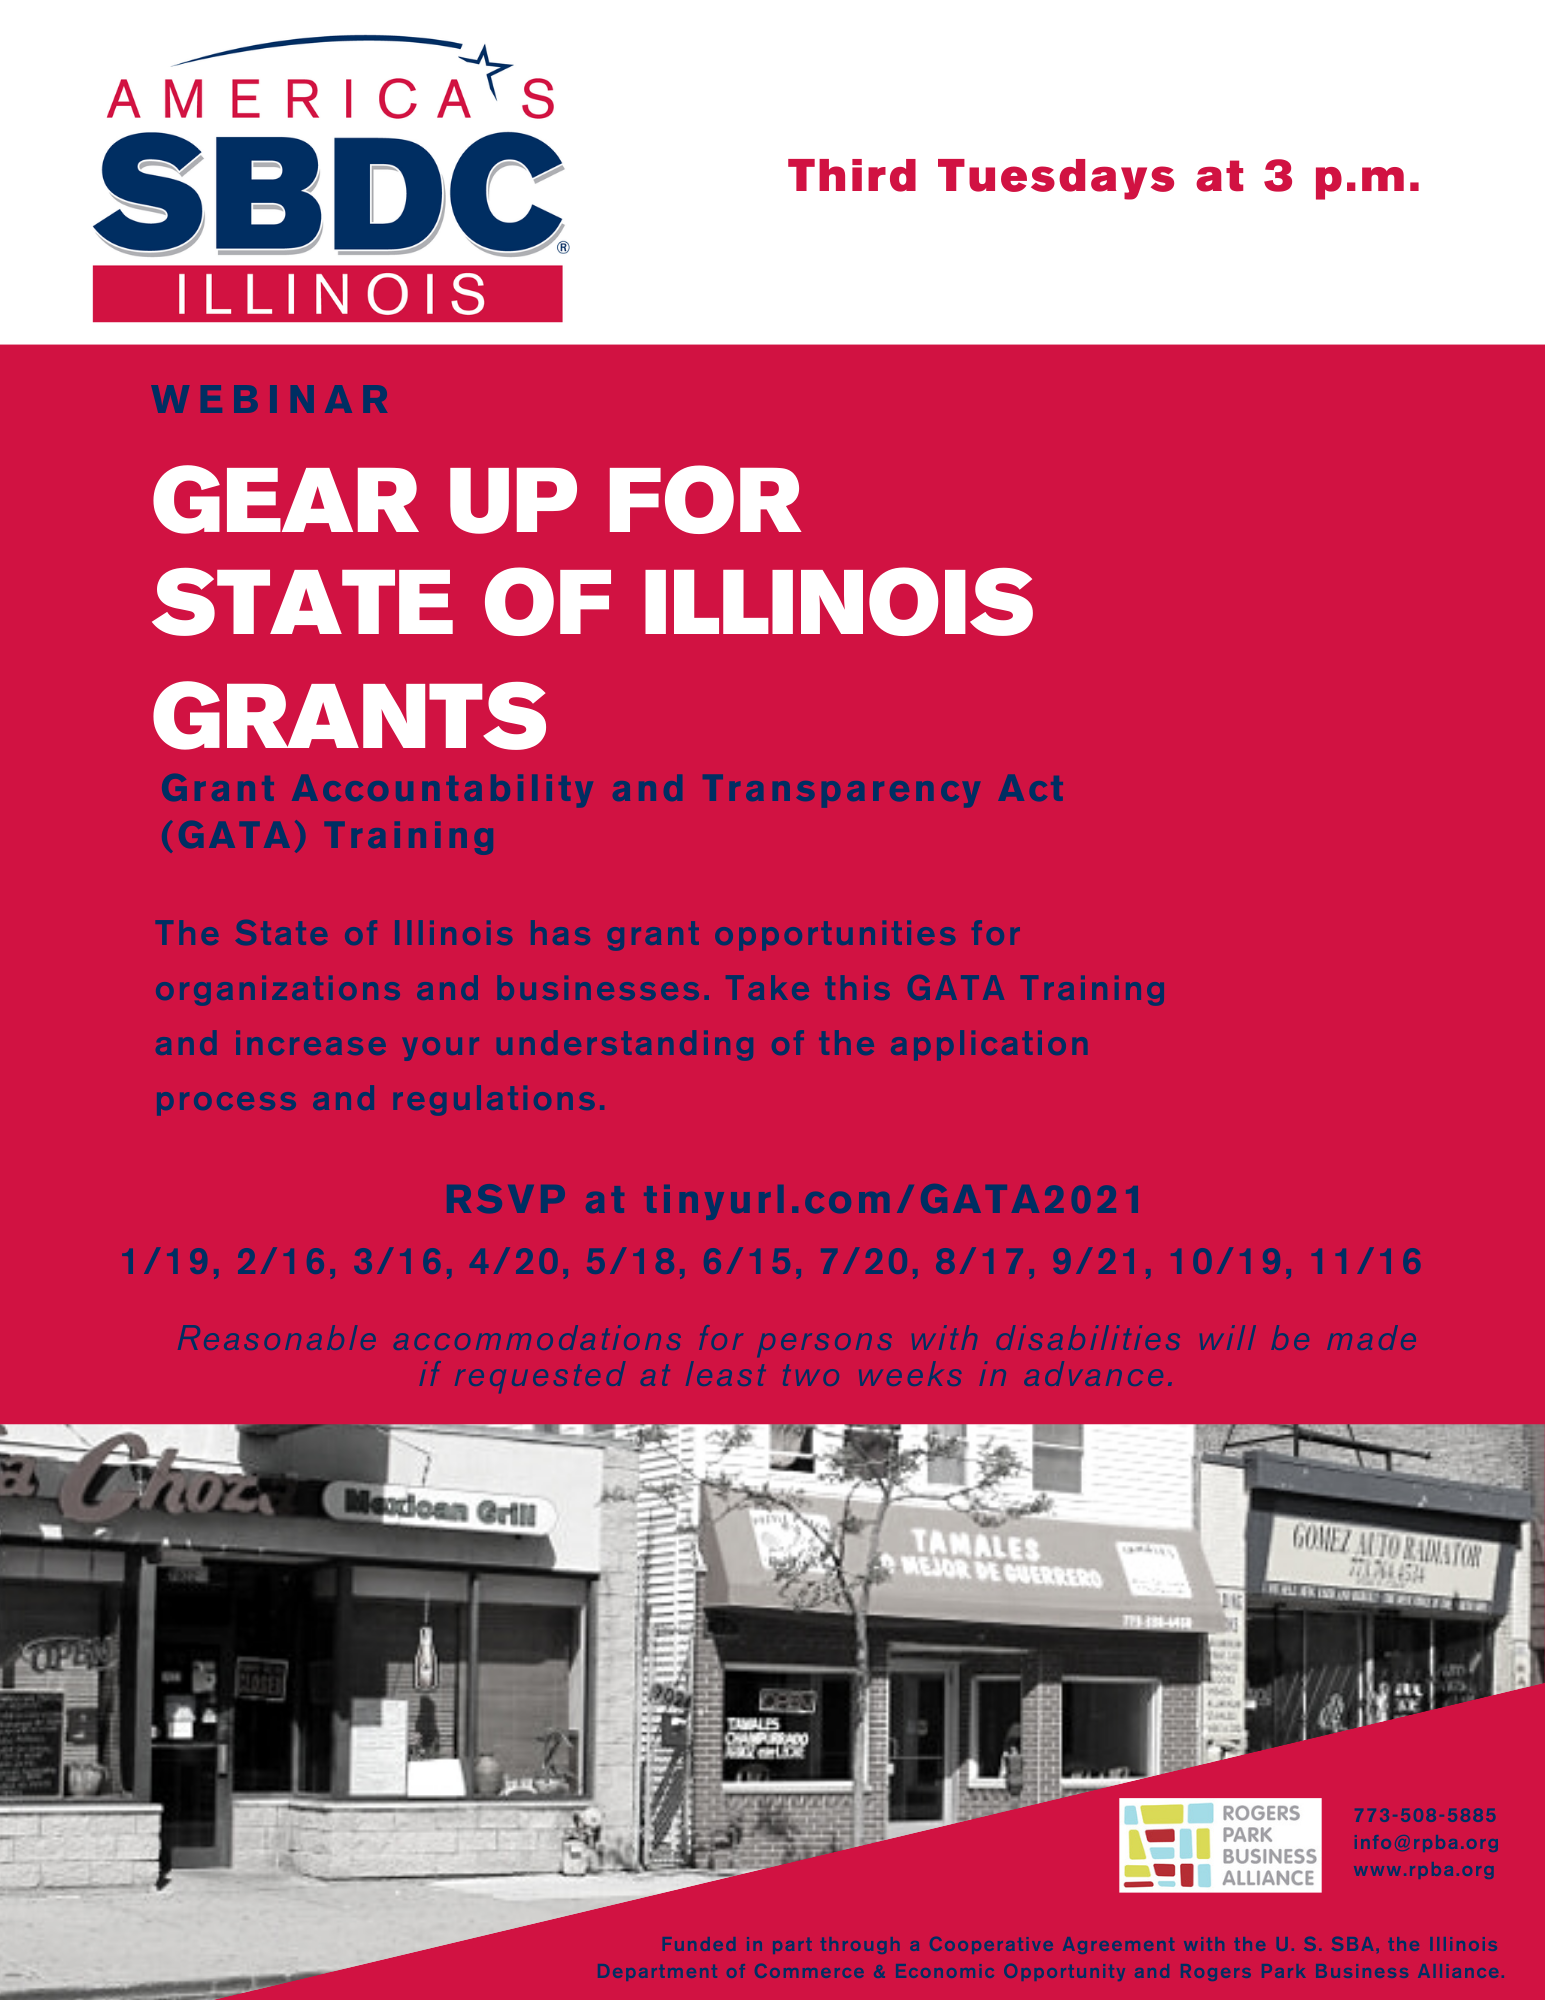 Gear Up for State of Illinois Grants (GATA), rogers-park-business-alliance